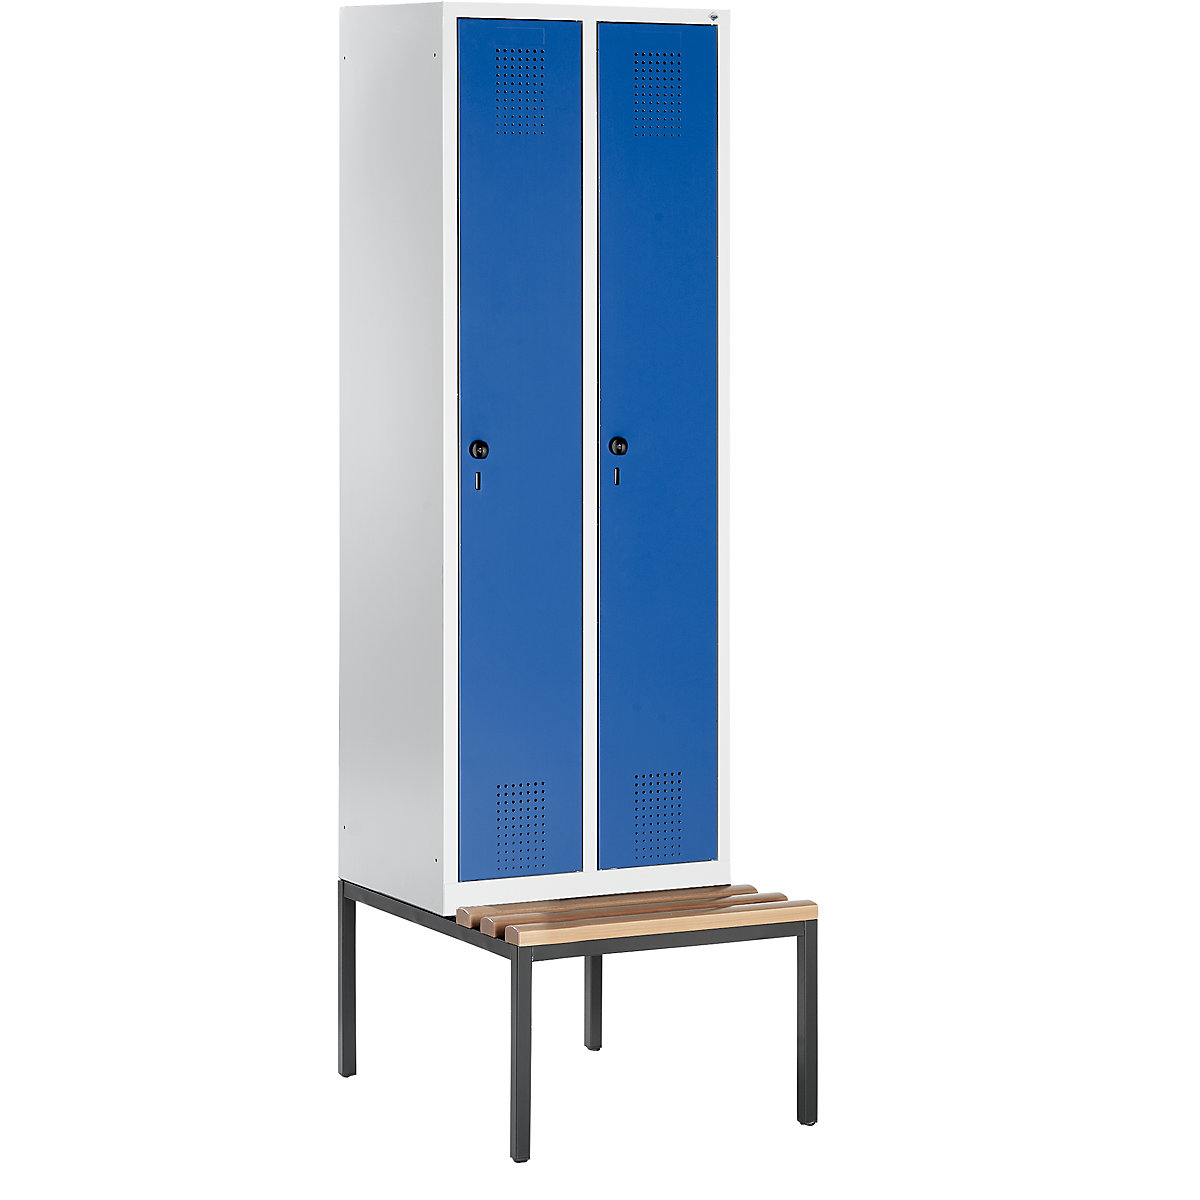 EVOLO cloakroom locker – C+P, with bench mounted underneath, 2 compartments, compartment width 300 mm, light grey / gentian blue-5